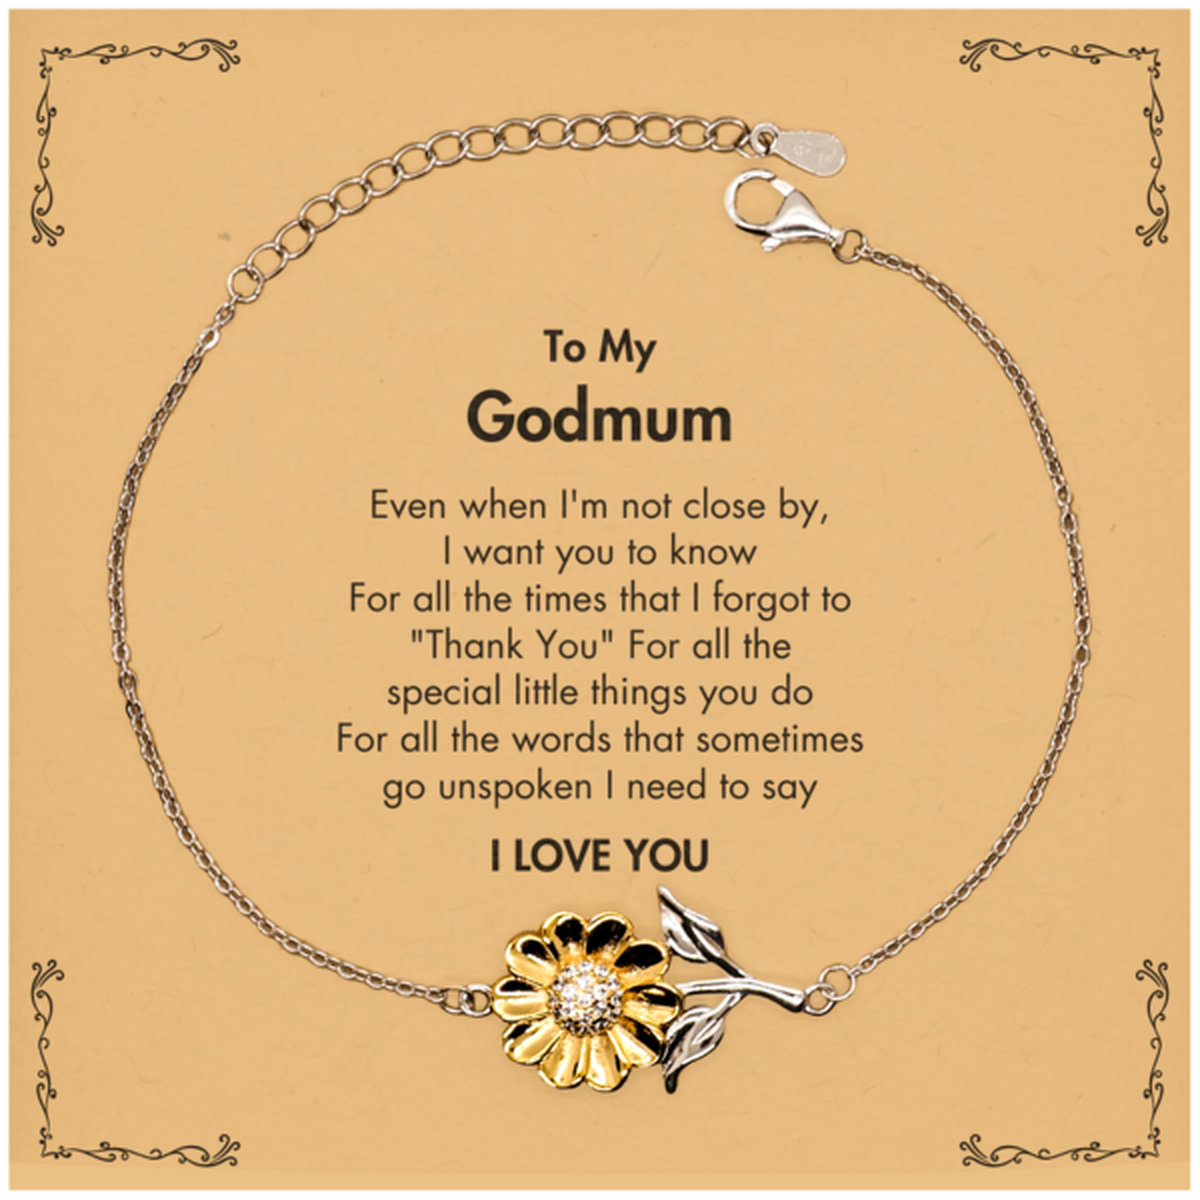 Thank You Gifts for Godmum, Keepsake Sunflower Bracelet Gifts for Godmum Birthday Mother's day Father's Day Godmum For all the words That sometimes go unspoken I need to say I LOVE YOU